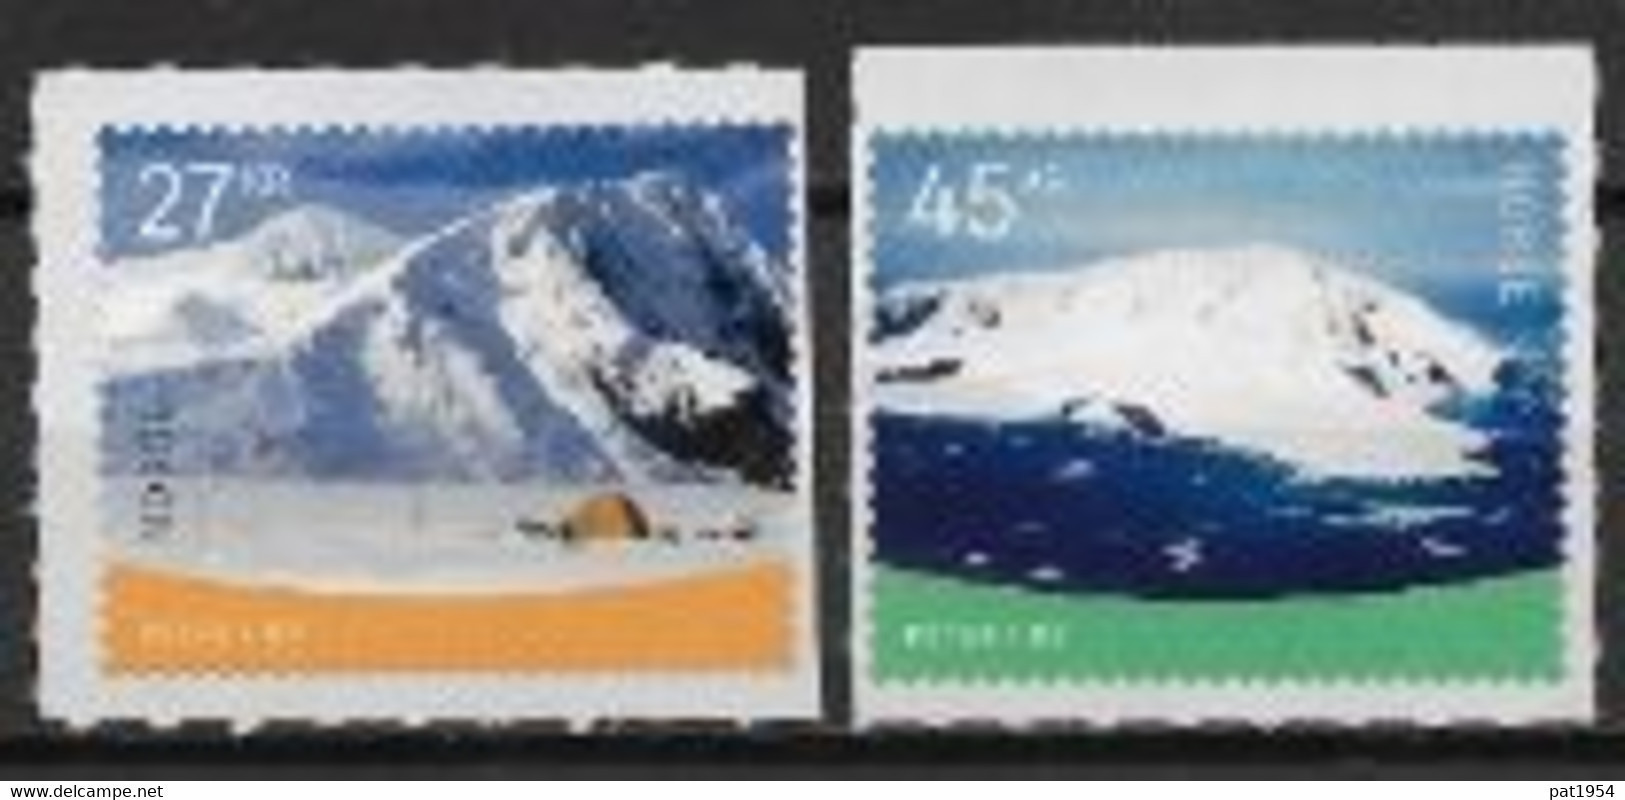 Norvège 2021 Timbres Neufs Ile Peter - Unused Stamps